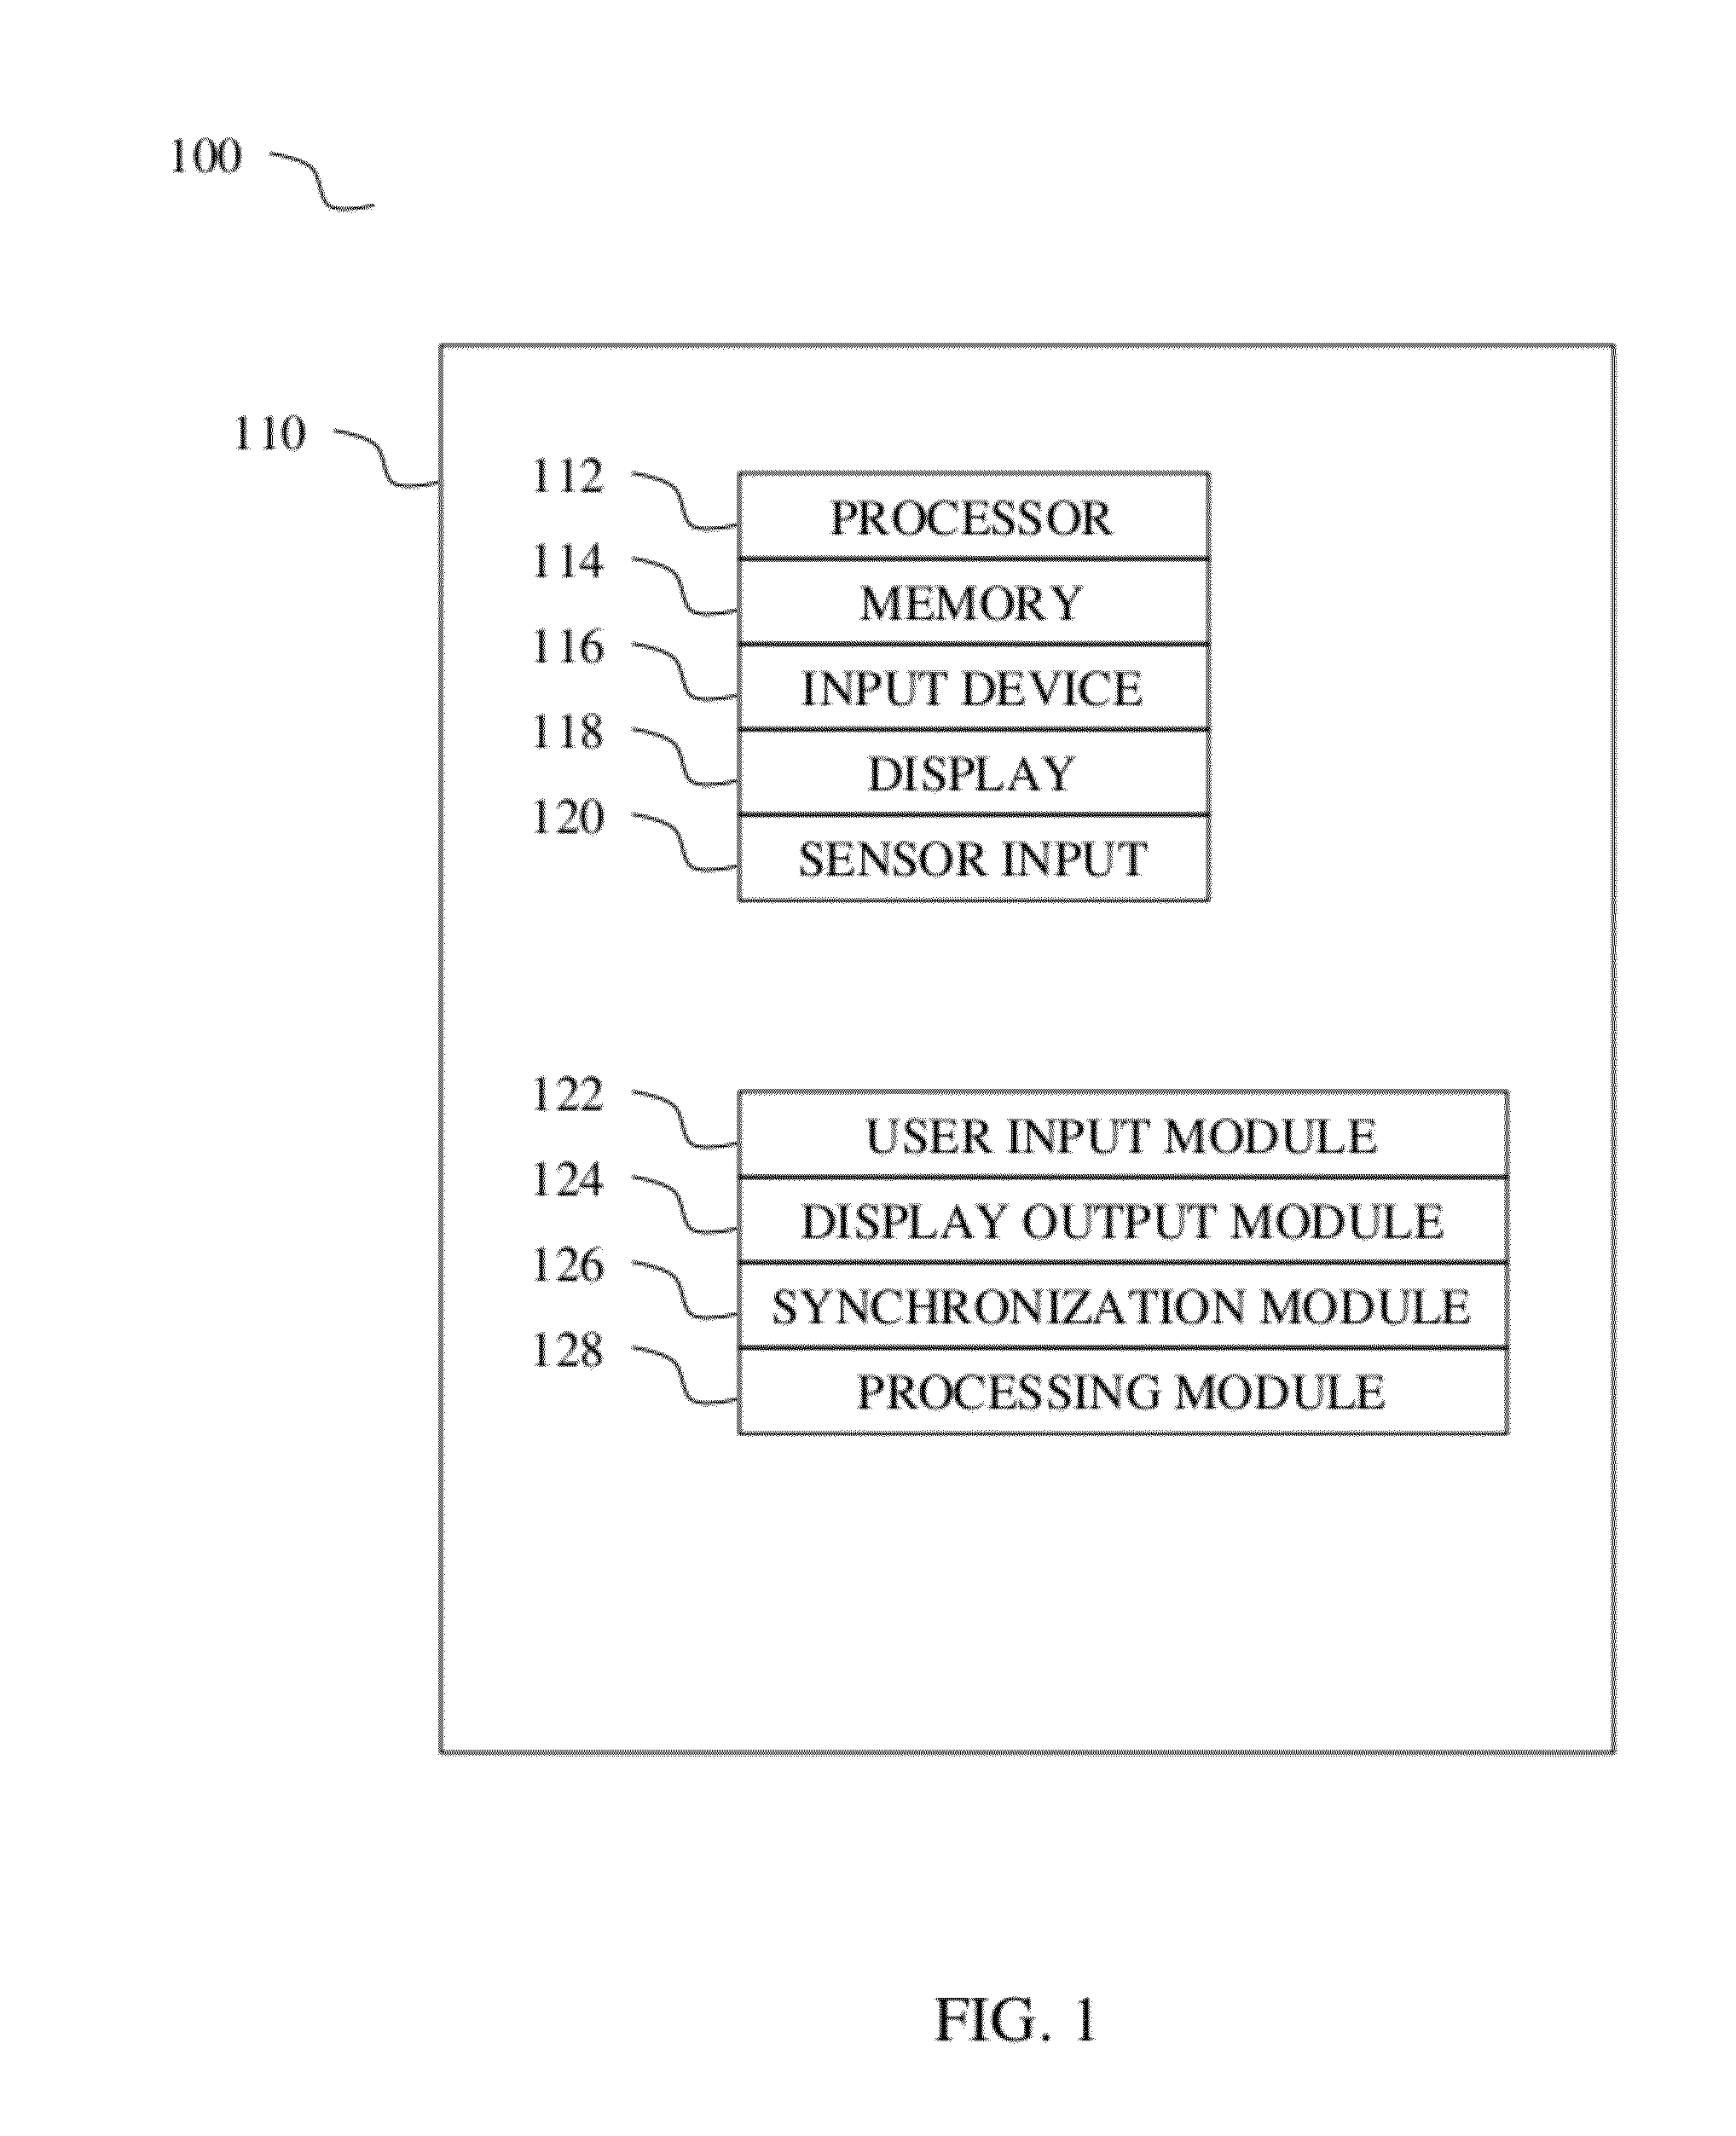 Method and System of Progressive Analysis for Assessment of Occluded Data and Redendant Analysis for Confidence Efficacy of Non-Occluded Data